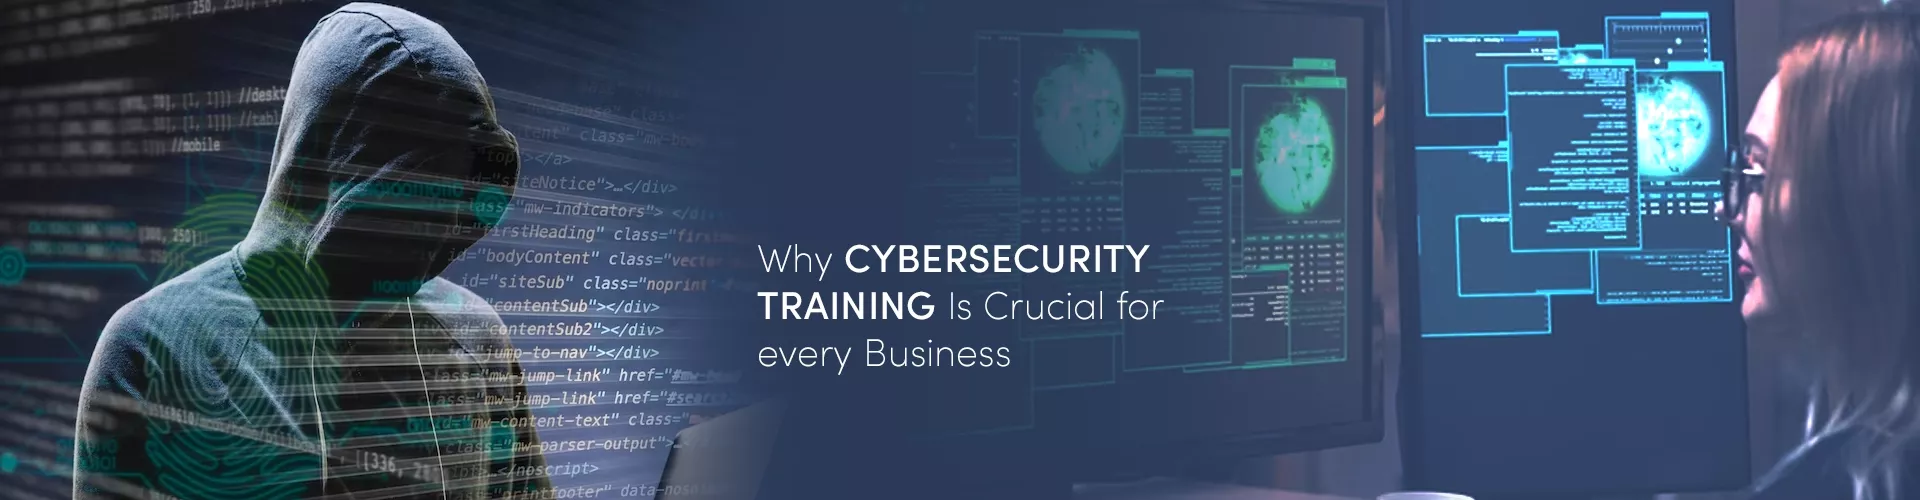 Why Cybersecurity Training Is Crucial for Every Business